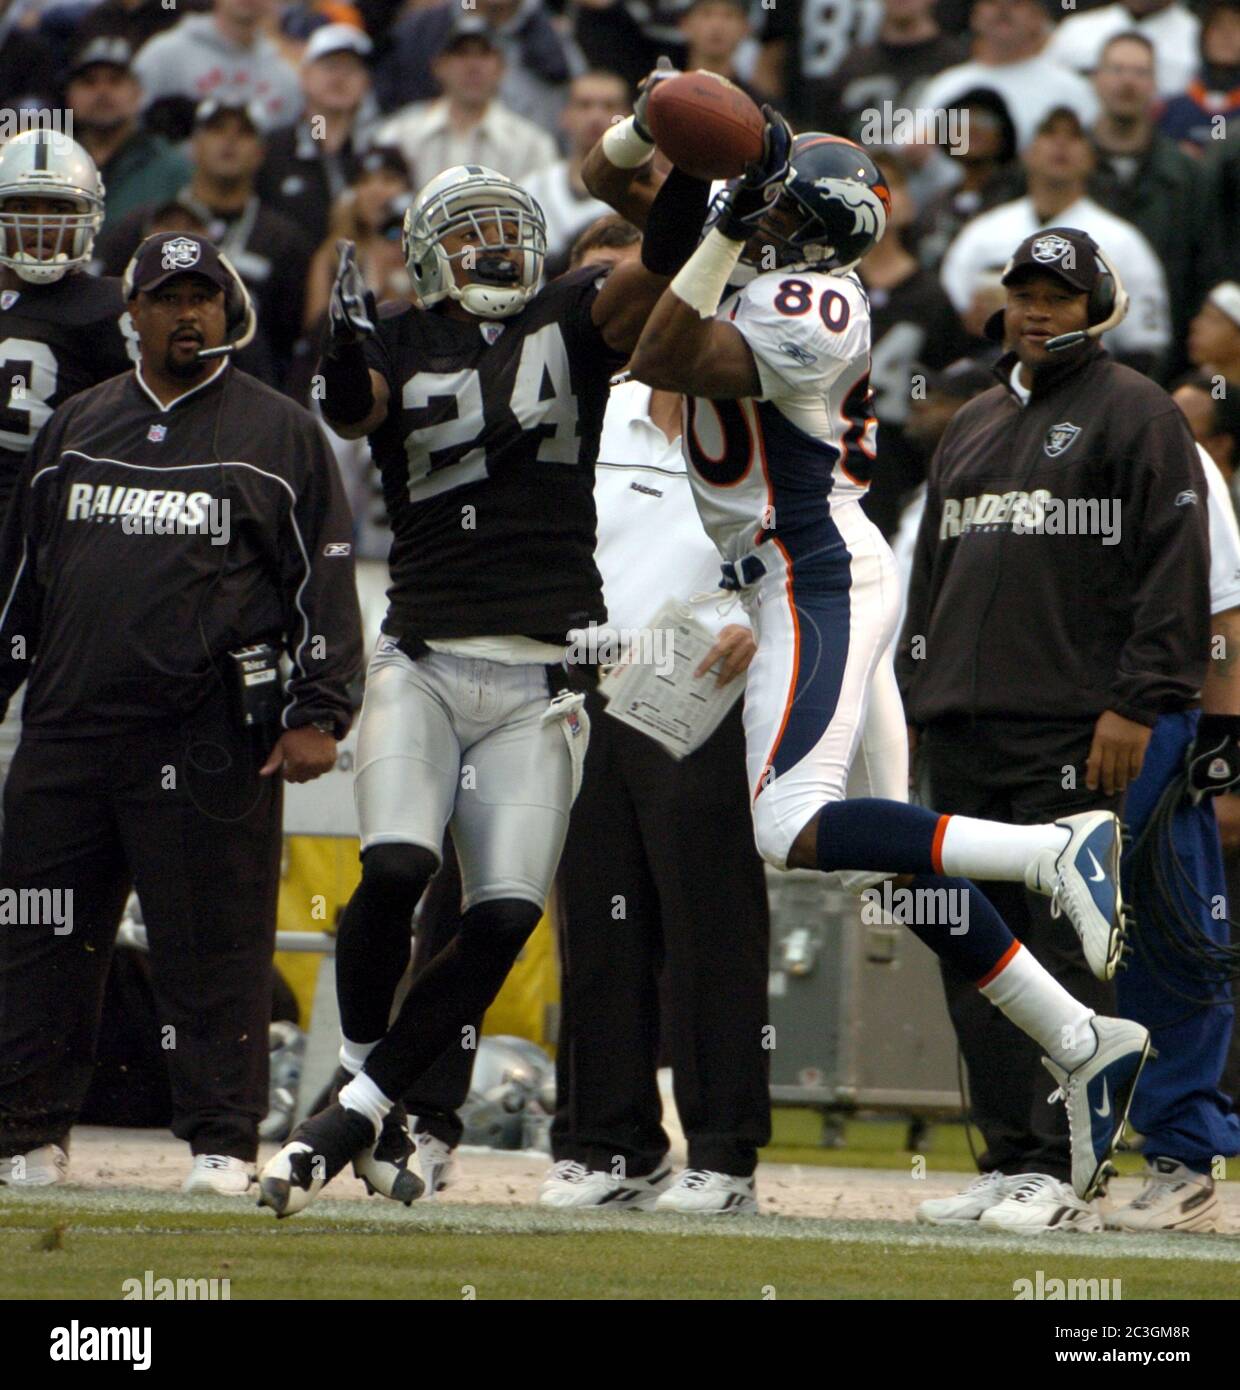 Oakland, United States. 17th Oct, 2004. Oakland Raiders cornerback Charles  Woodson breaks up a pass intended for Rod Smith of the Denver Broncos  during 31-3 loss at Network Associates Coliseum in Oakland,